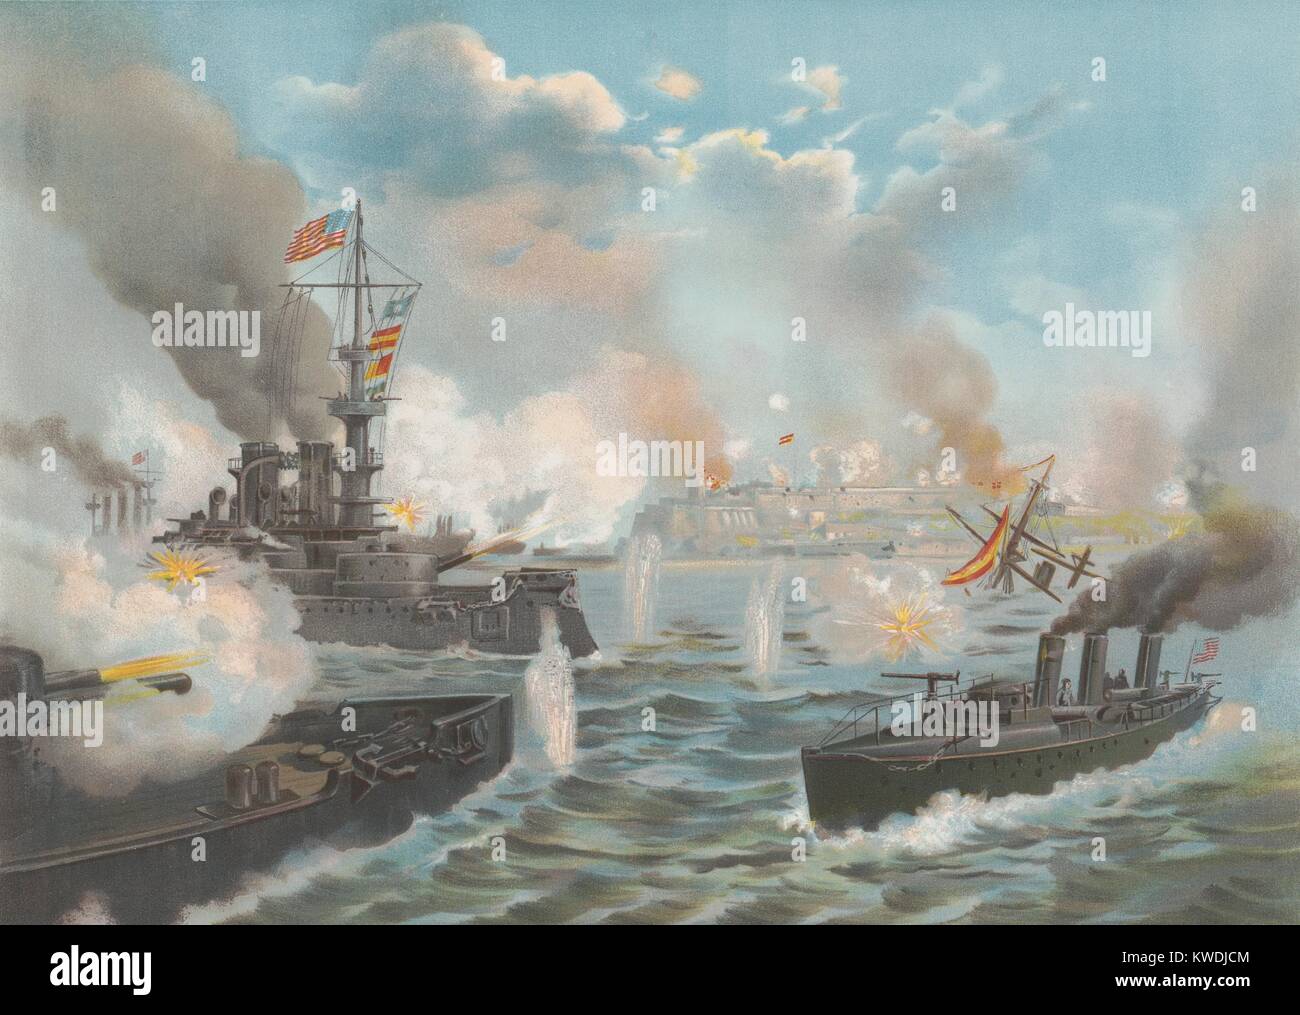 Bombardment of San Juan, Puerto Rico, May 12, 1898 lasted for 3 hours. US Admiral William Sampsons main objective was to engage the Spanish Fleet. Failing in that, he attacked San Juan’s fortifications, loosing 2 US sailors and killing 8 civilians. Sec. of Navy Long noted the attack inflicted little damage with much expensive ammunition (BSLOC 2017 10 51) Stock Photo